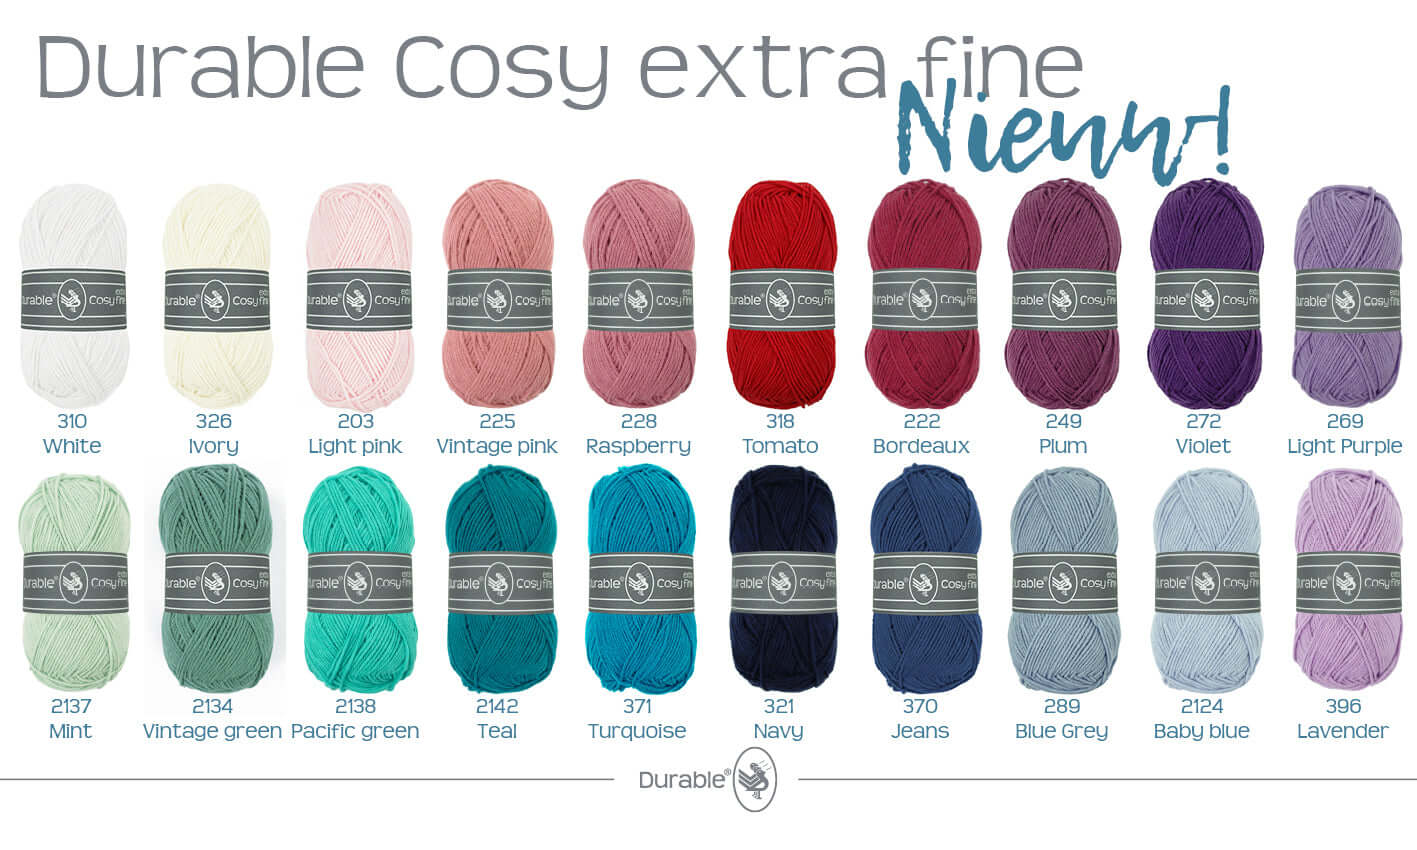 Durable Cosy Extra Fine - 2137 Mint